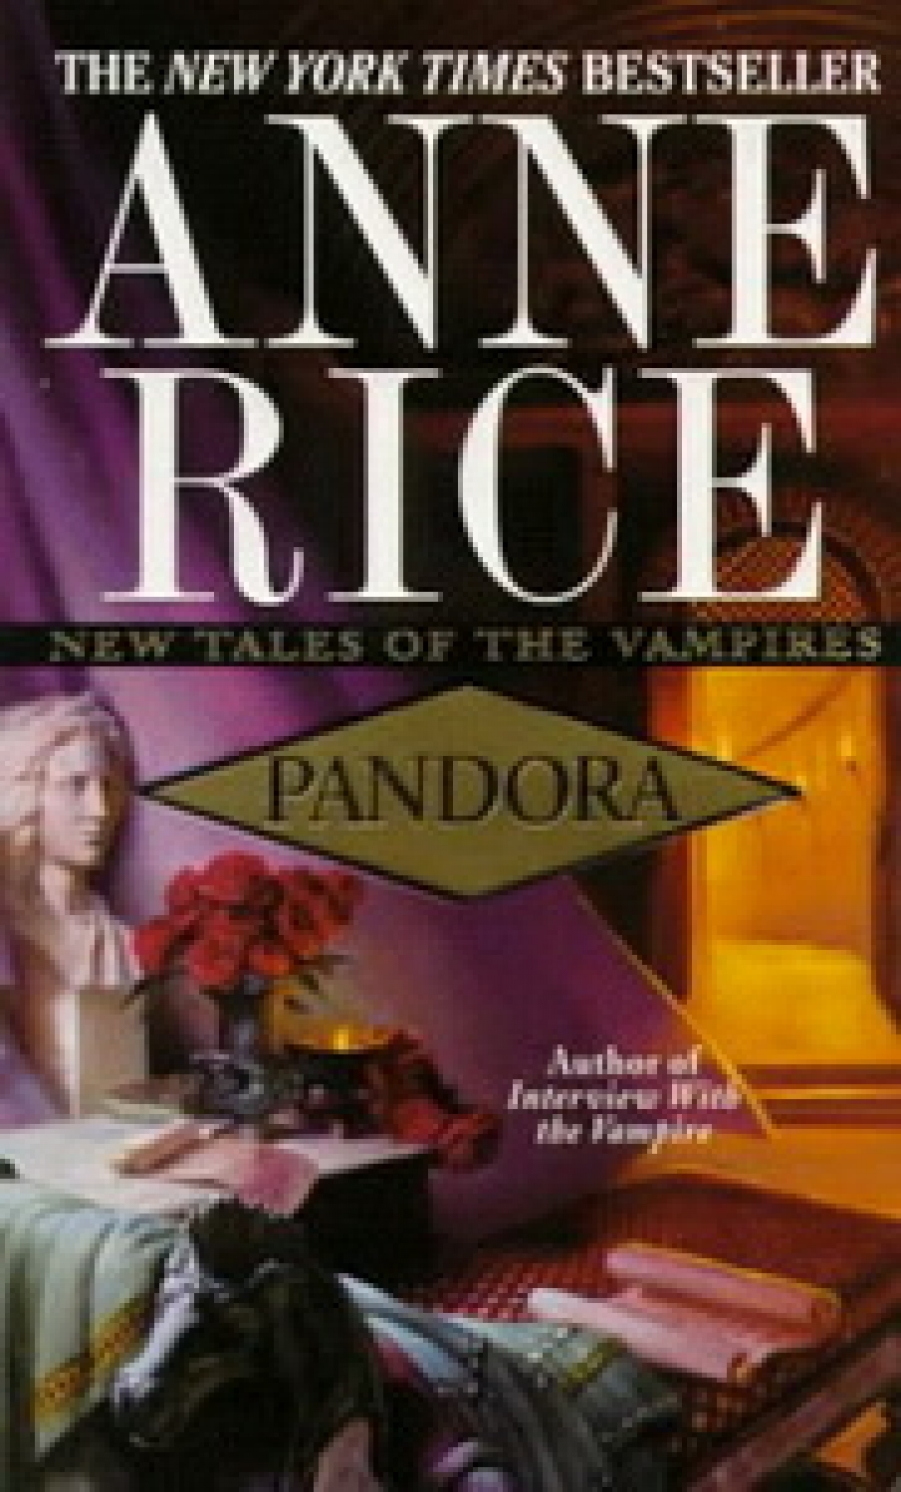 Anne R. Pandora: New Tales of the Vampires 